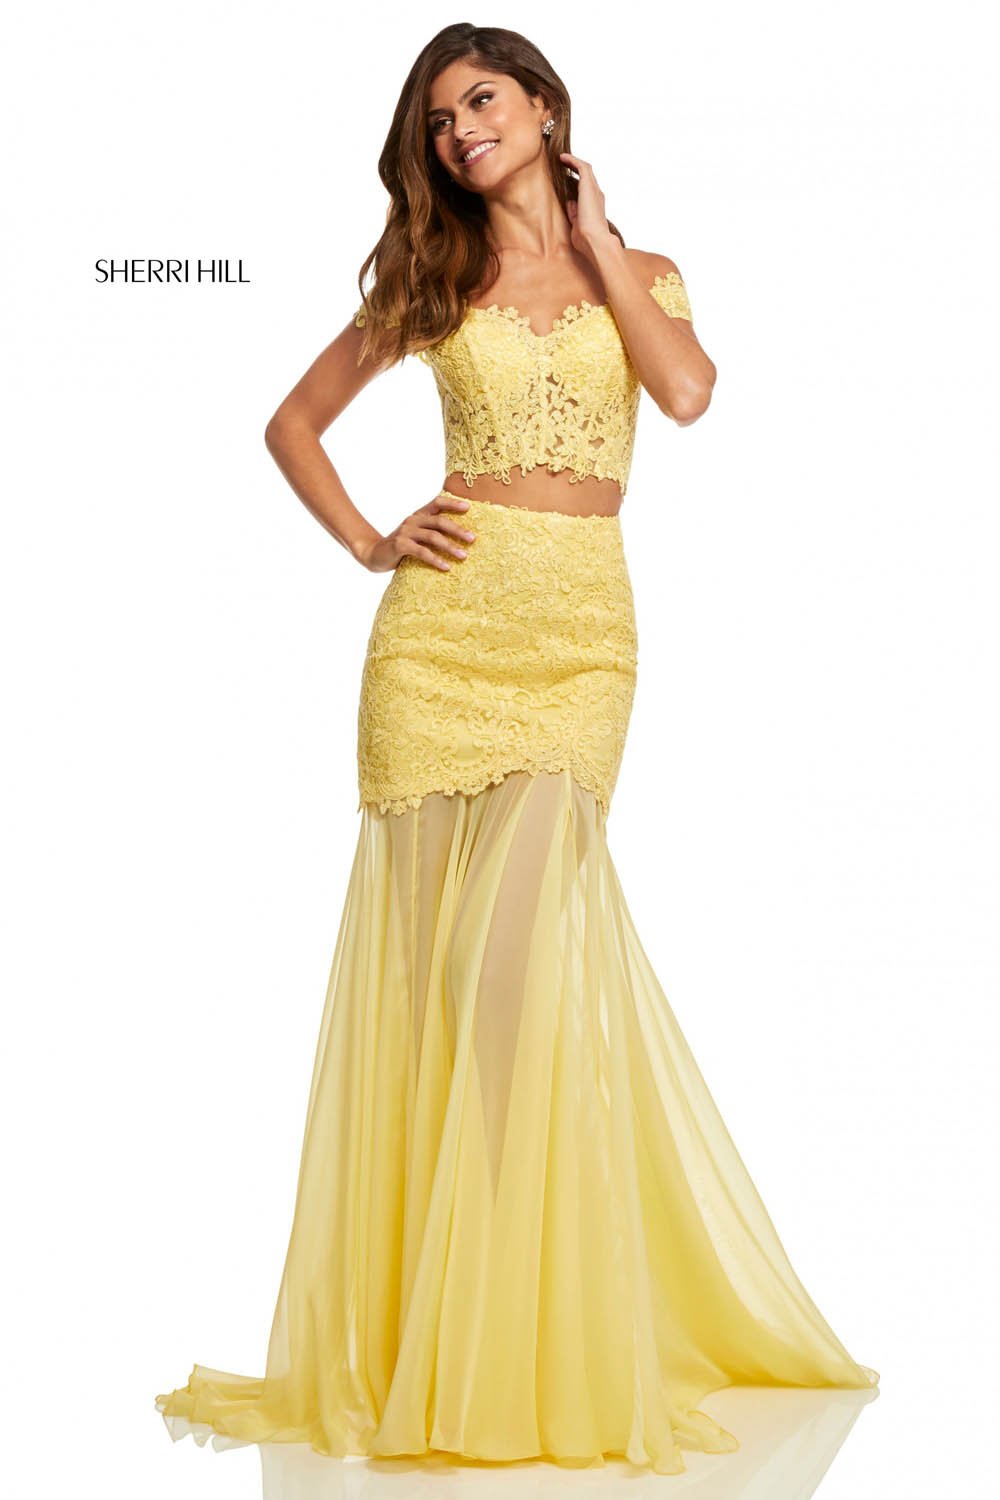 Sherri Hill 52719 dress images in these colors: Ivory, Black, Light Blue, Red, Yellow, Light Coral, Coral, Navy, Blush.